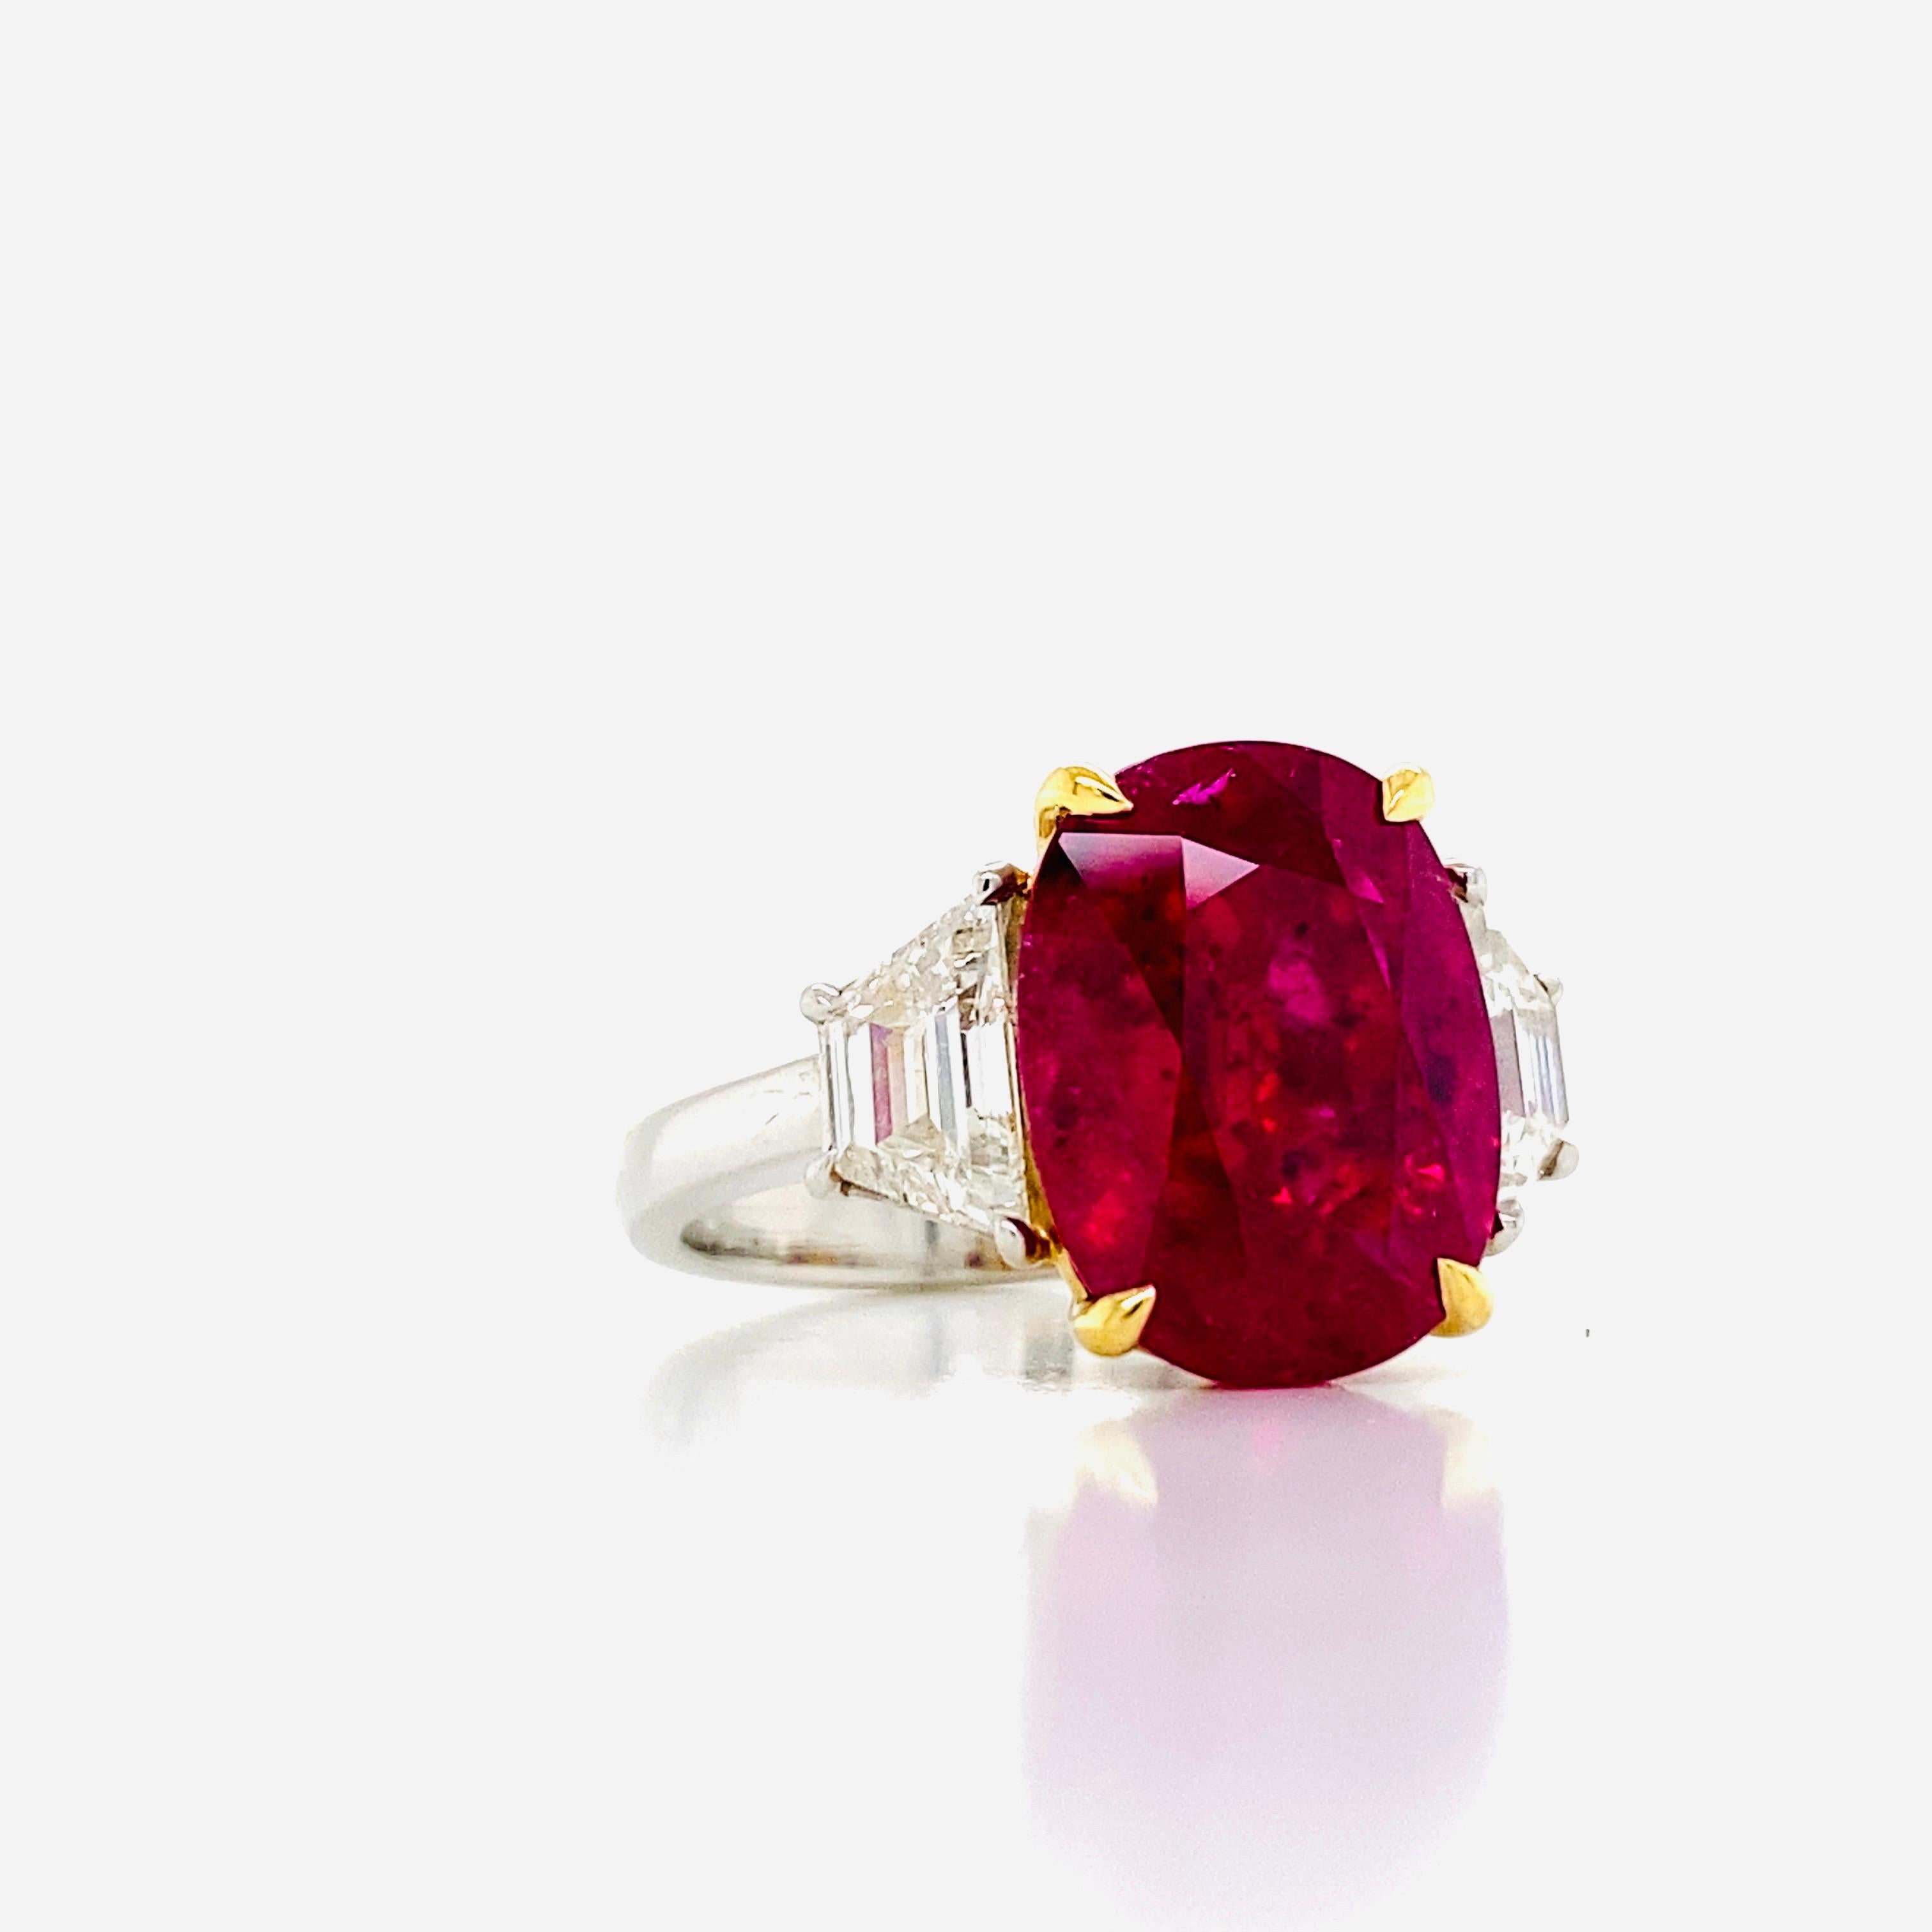 From the Emilio Jewelry Vault, Showcasing a magnificent 7.55 carat natural Ruby set in the center. Gorgeous vibrant natural untreated Thai Ruby. The elongated shape is very rare, the color is just perfect and very vibrant. 
Priced attractively